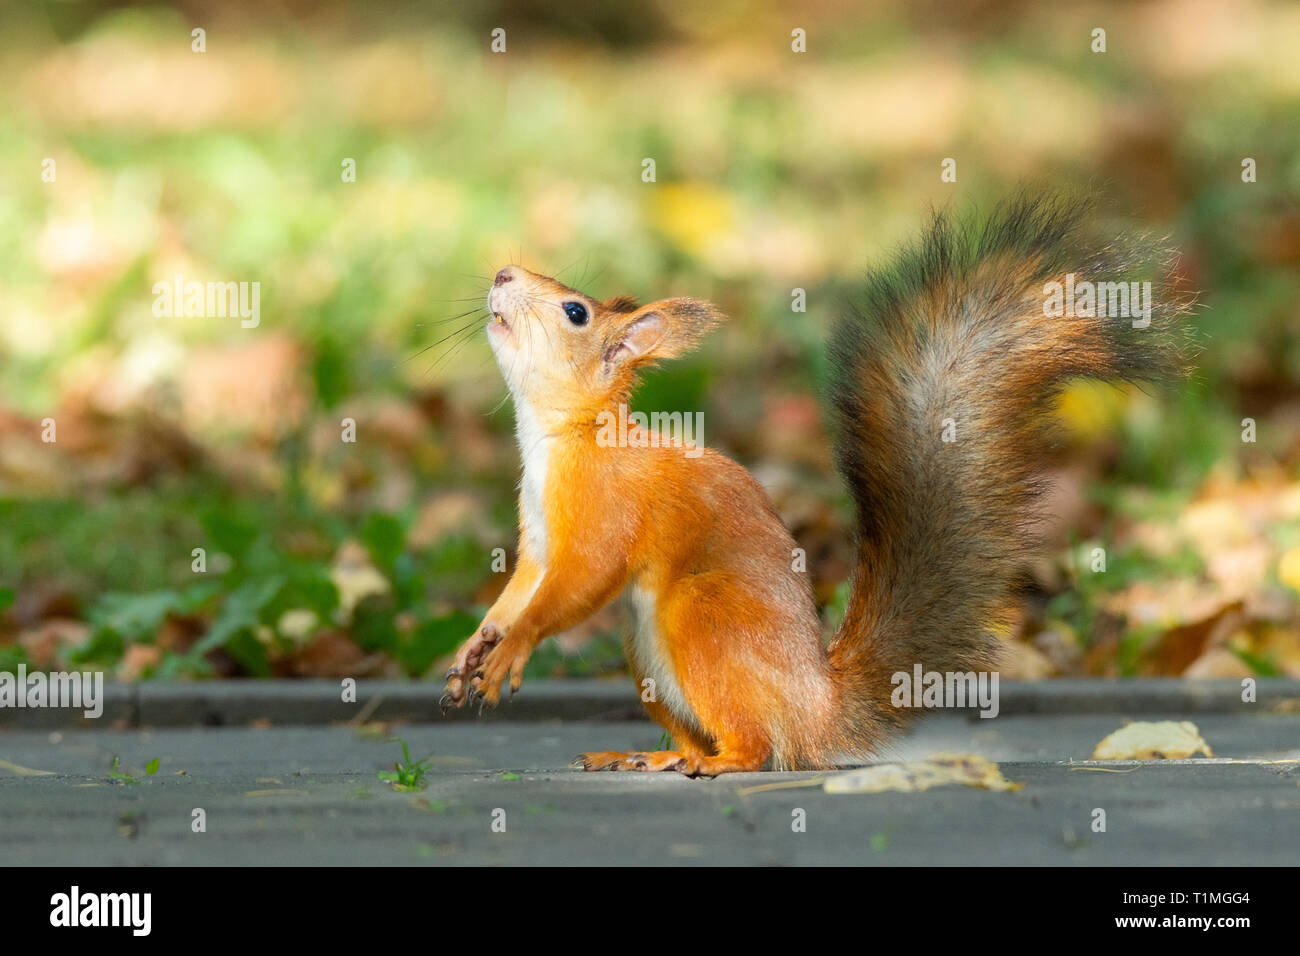 Squirrel sits on the asphalt in an autumn park and waits for a nut Stock Photo